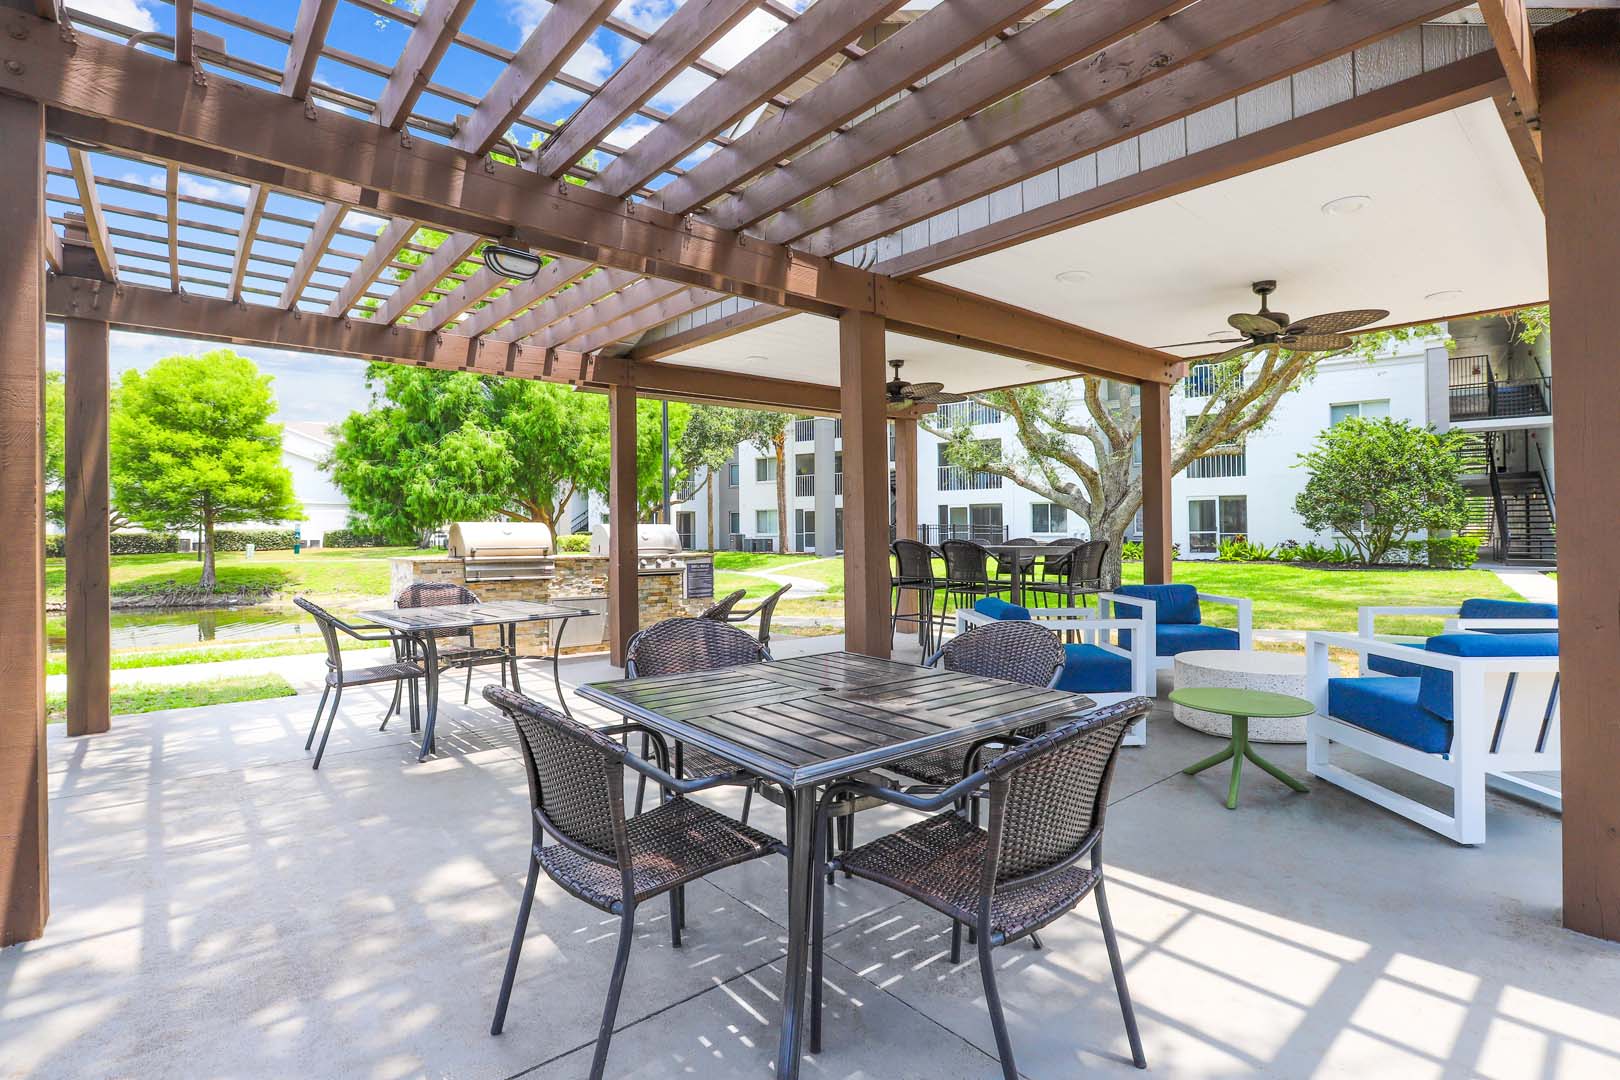 Outdoor gazebo and pergola with fans, tables and chairs and two grills next to a lake with apartment buildings in the background.